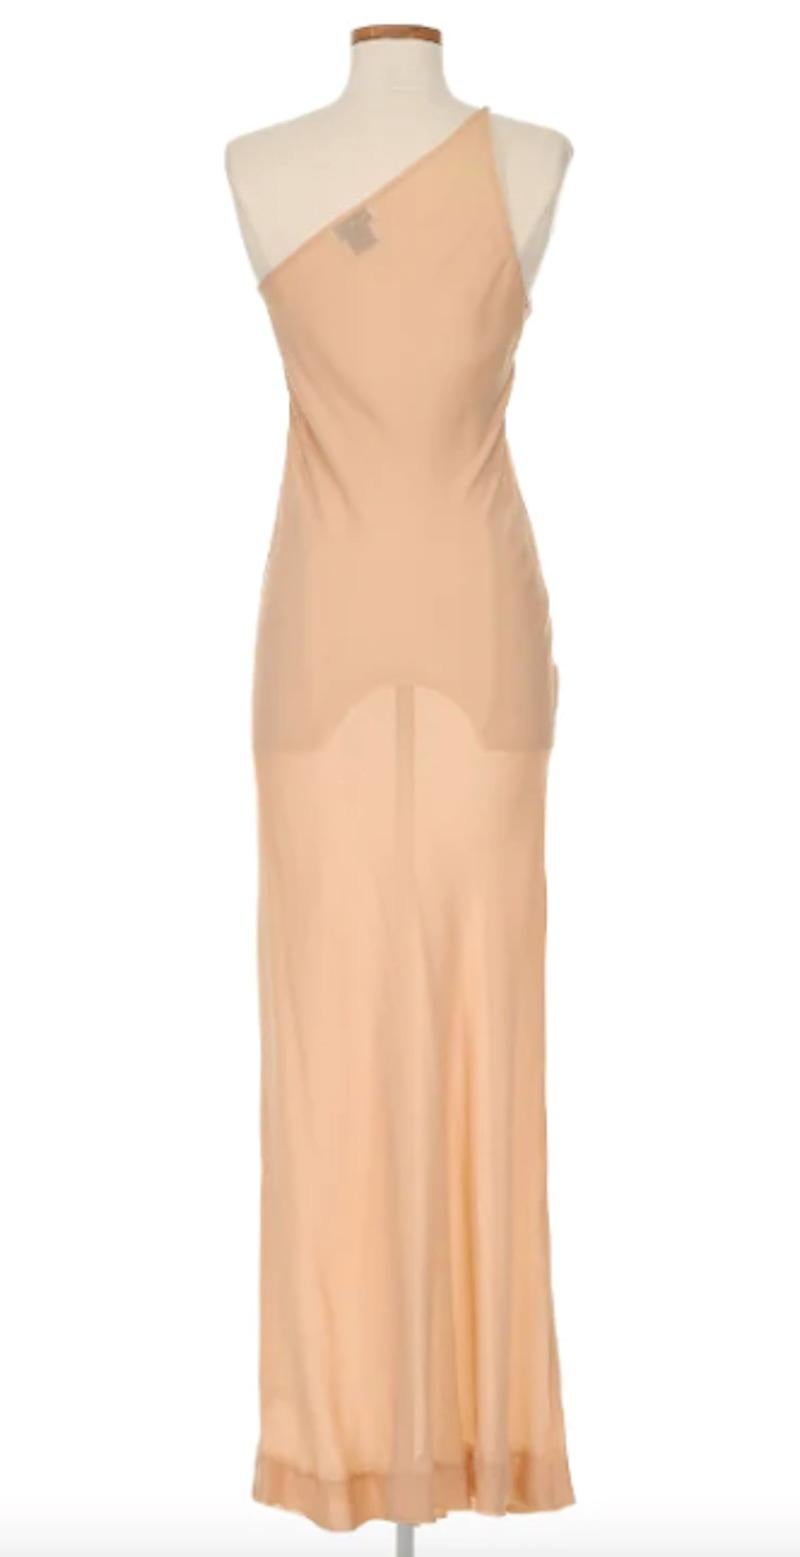 Halston 1970's Haute Couture Nude One Shoulder Dress. This dress exudes timeless elegance - in a sheer nude silhouette and jeweled embellishments along the neckline, this piece is truly memorable, and a remarkable legacy of Halston's craftsmanship.